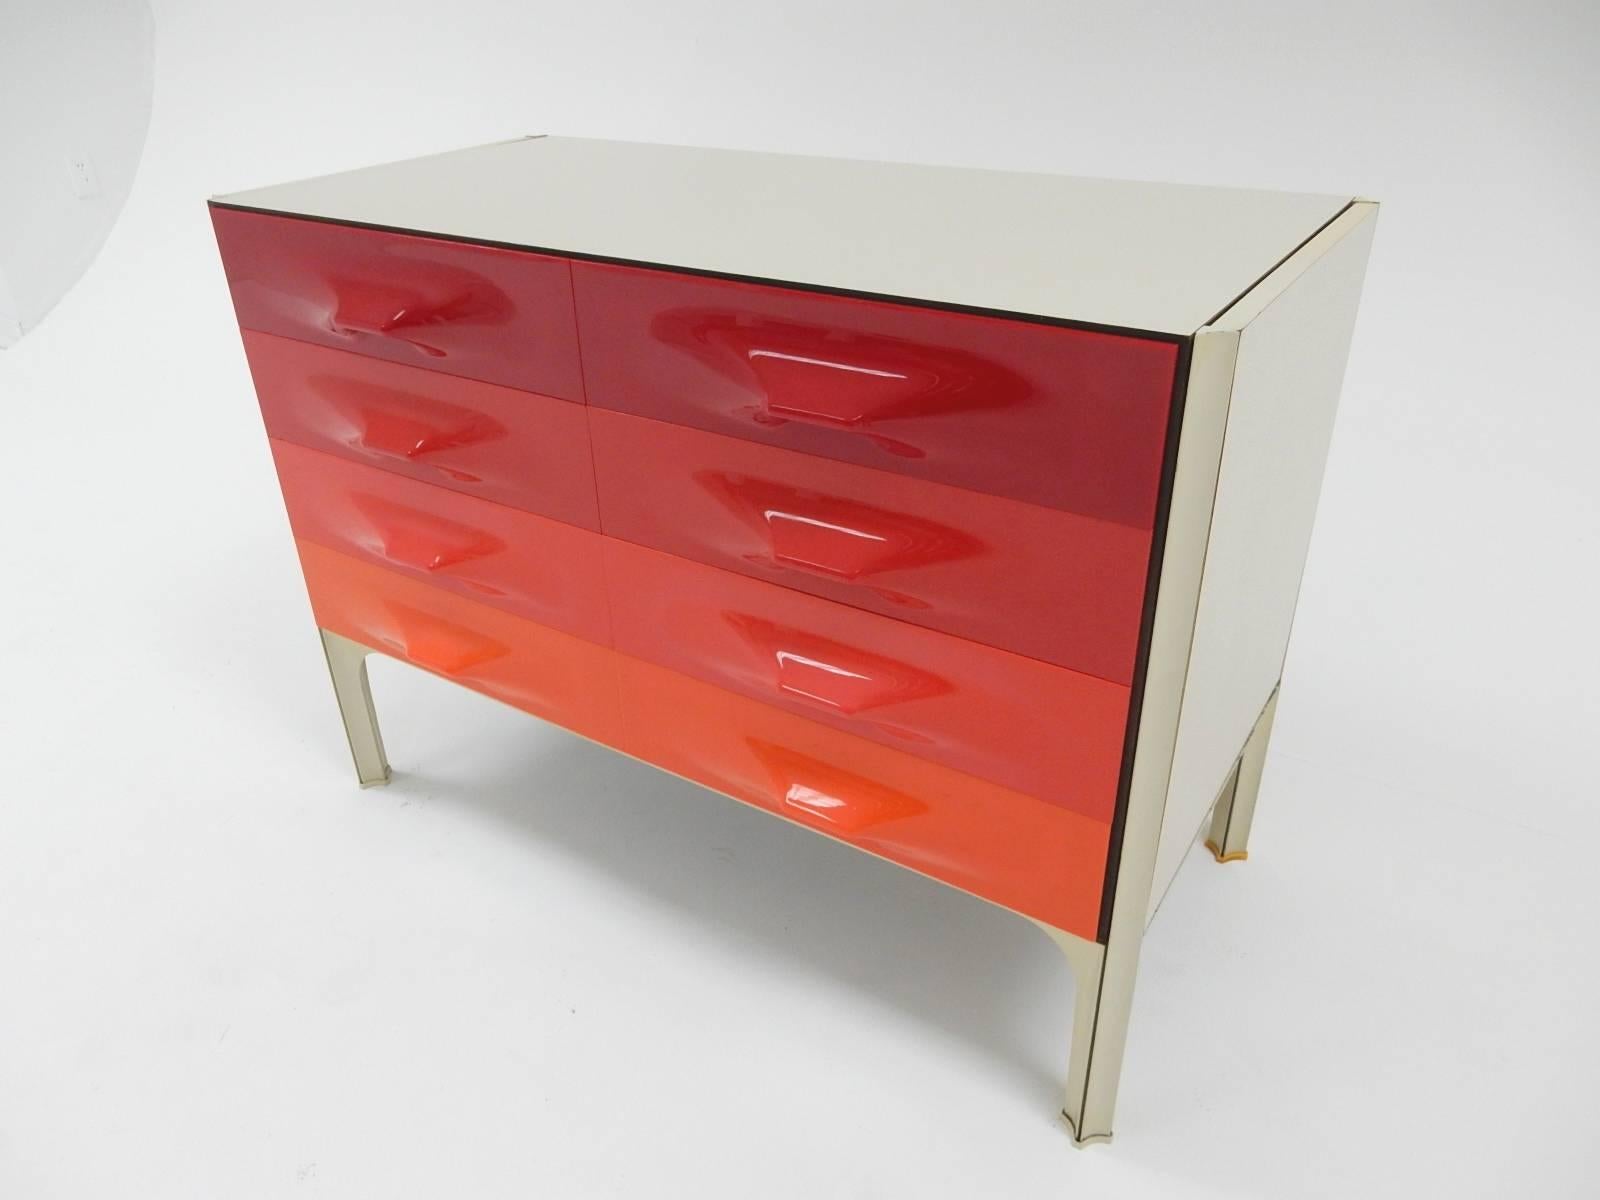 Amazing Mid-Century dresser designed by Raymond Loewy.
From the DF2000 X-line series with four color shades, rare.
Six drawers total. Beautiful piece of art furniture produced in 1968.